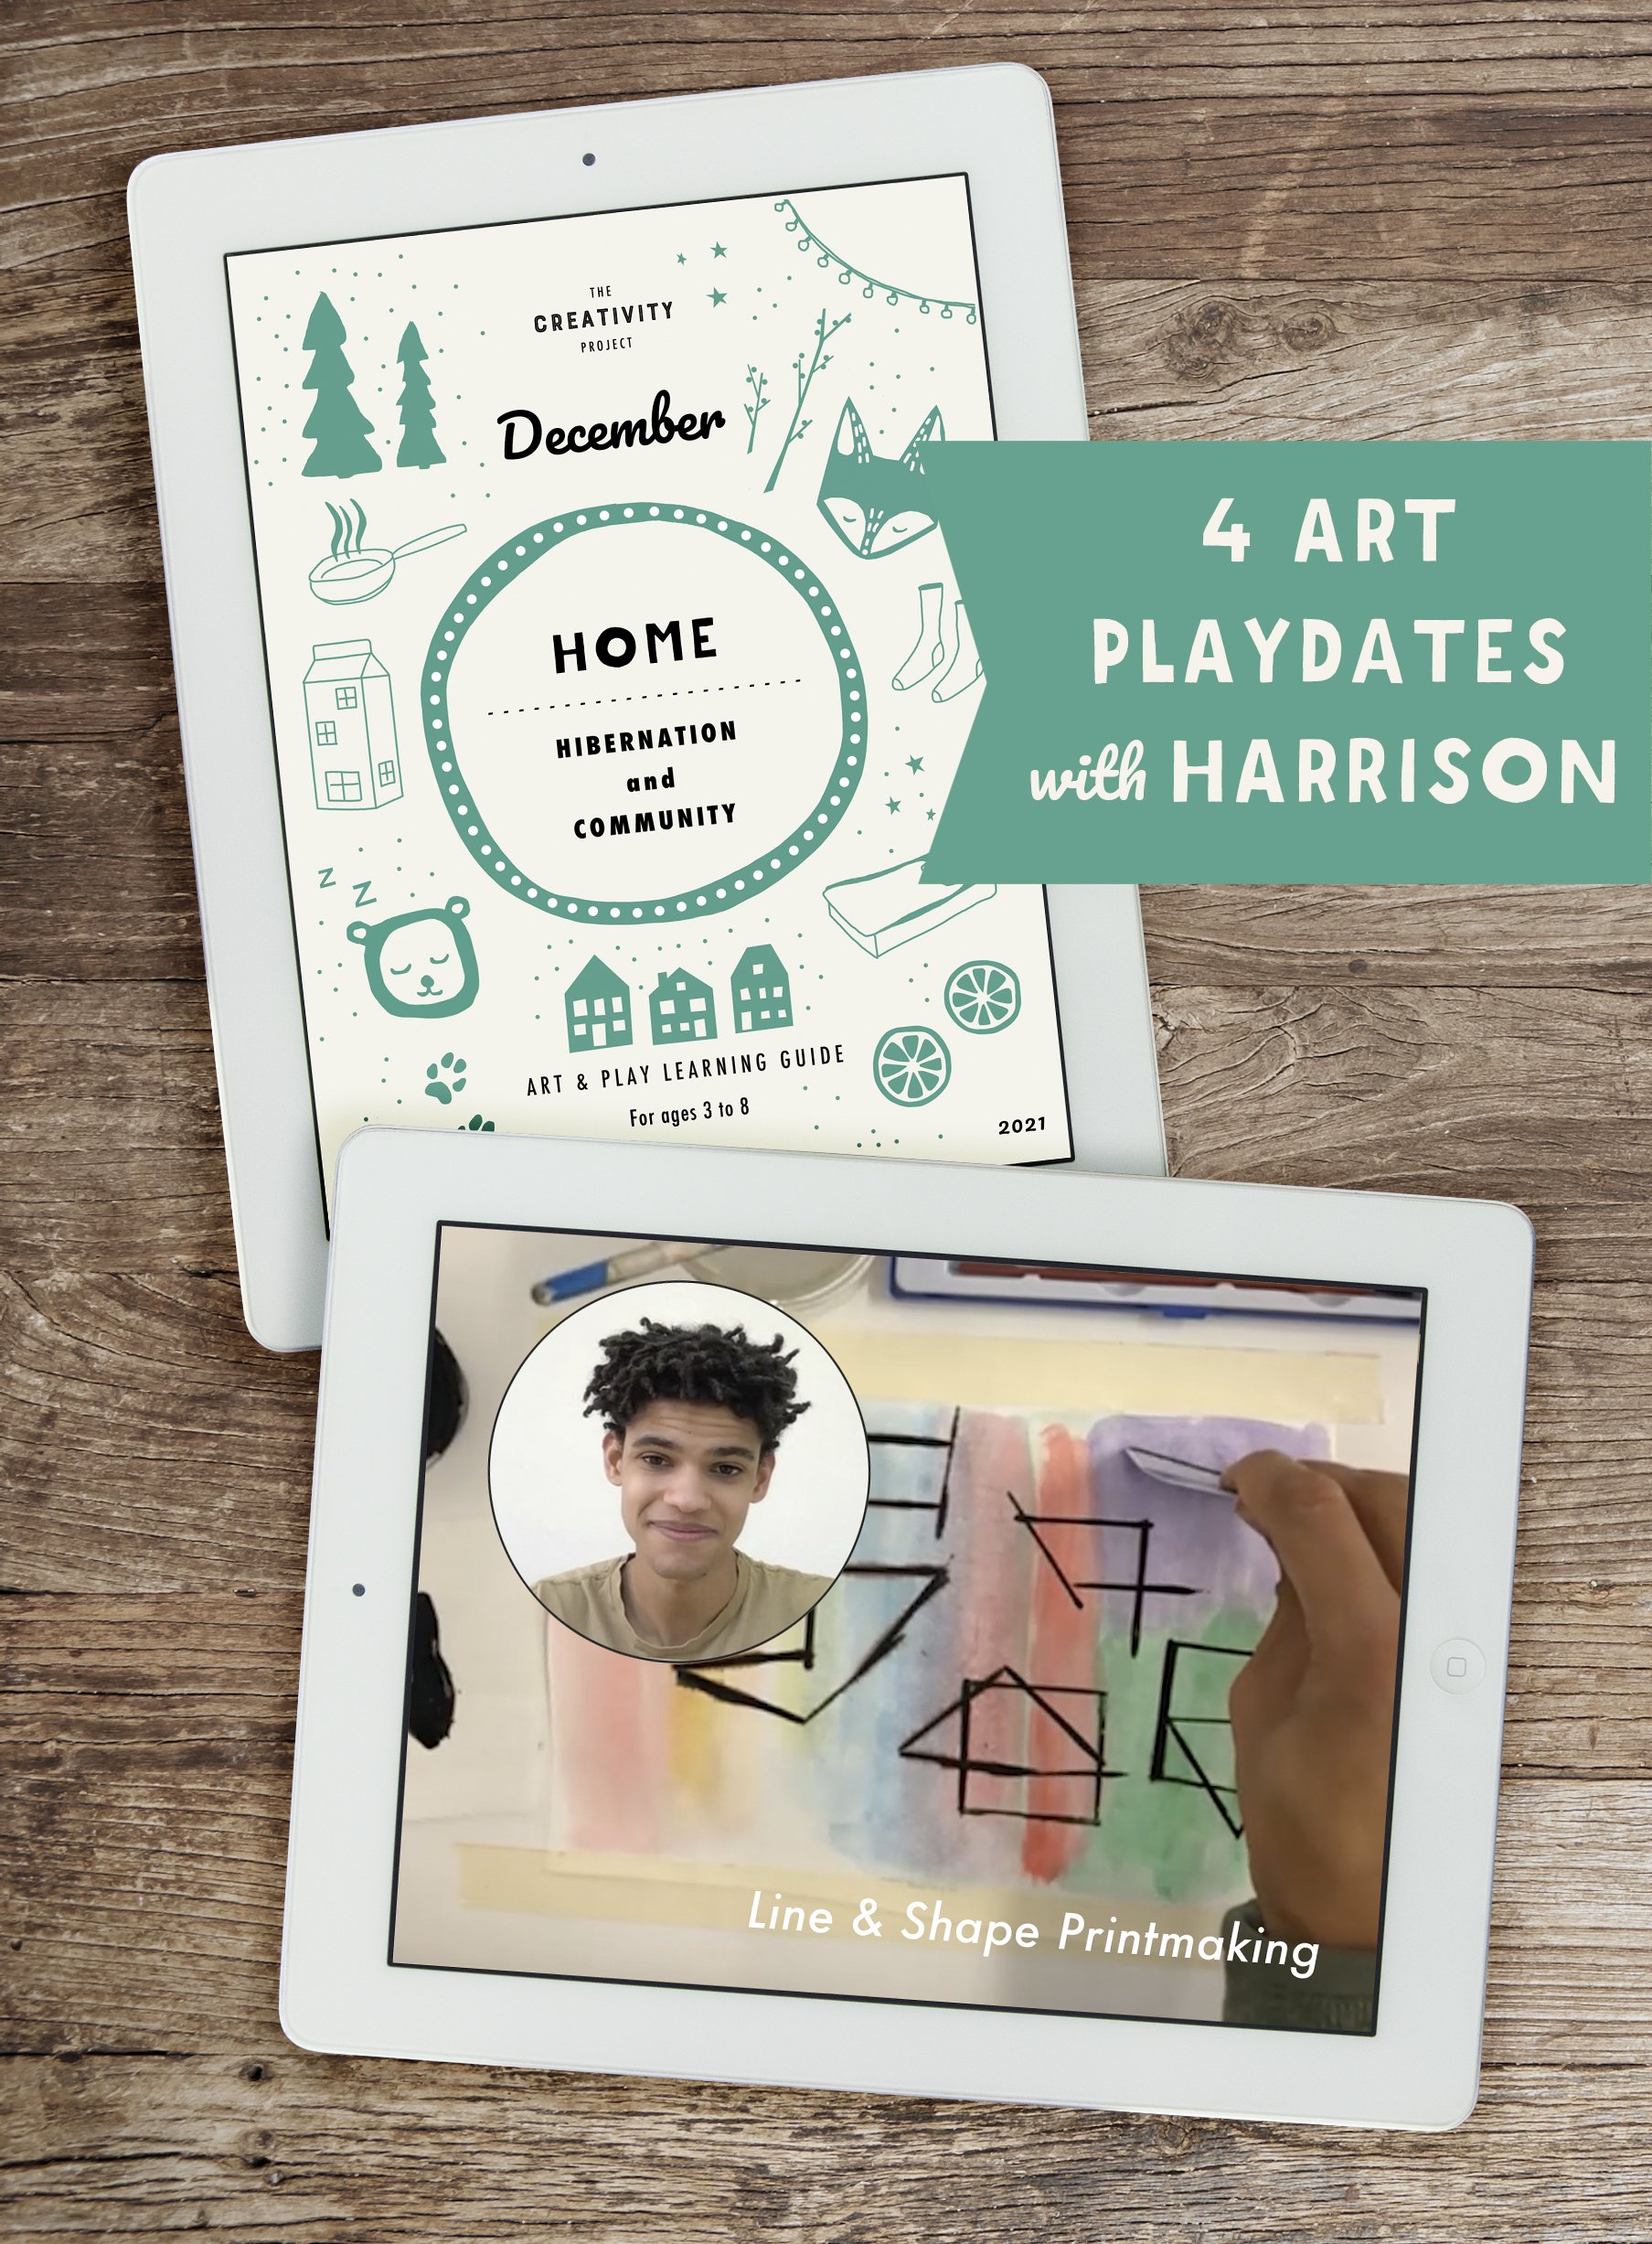 My Name Art Playdates & Creativity Guide — The Creativity Project